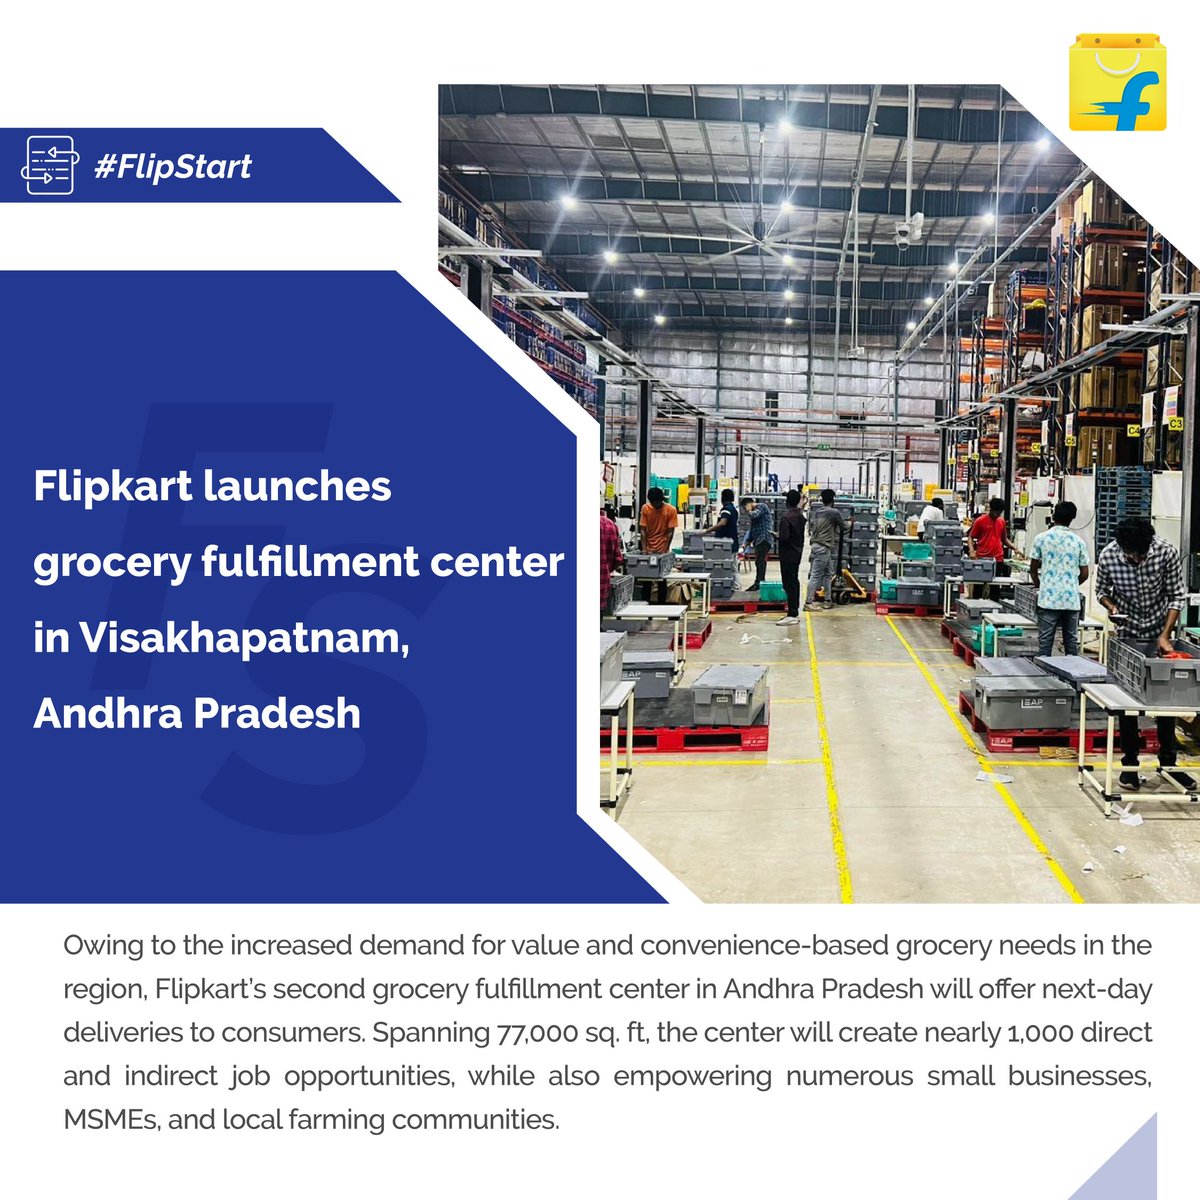 .@Flipkart launches its 2nd grocery fulfillment center in #AndhraPradesh reinforcing our commitment to making online shopping seamless for consumers nationwide. It will offer popular regional brands and 6,000+ products across categories. Flipkart continues to foster…